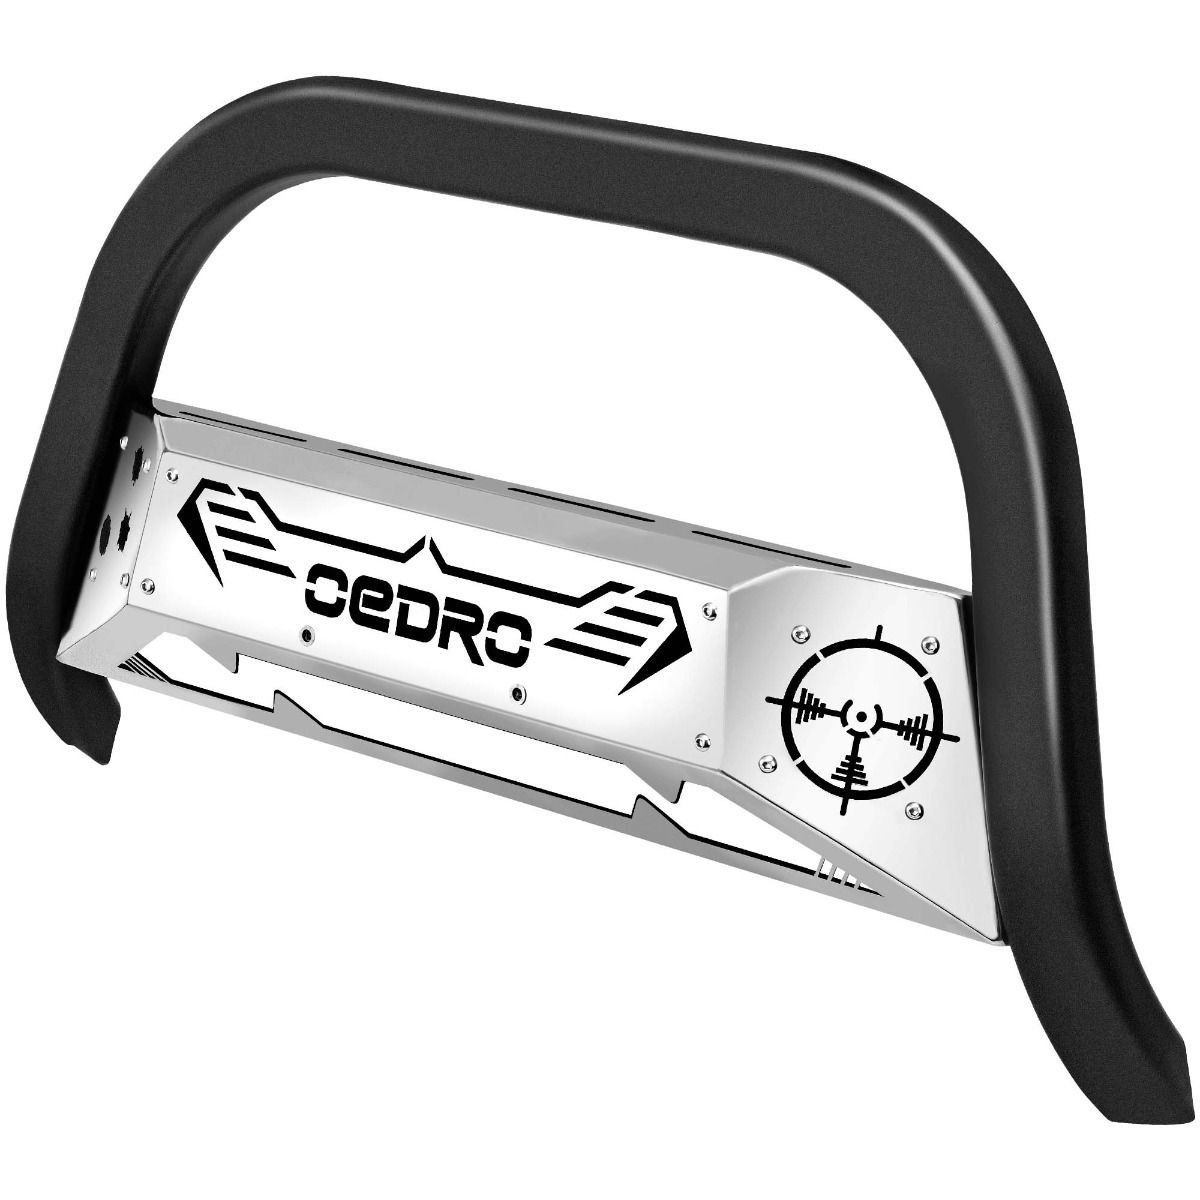 OEDRO? Front Brush Push Bumper Bull Bar for 2016-2022 Toyota Tacoma with Skid Plate & Light Mount